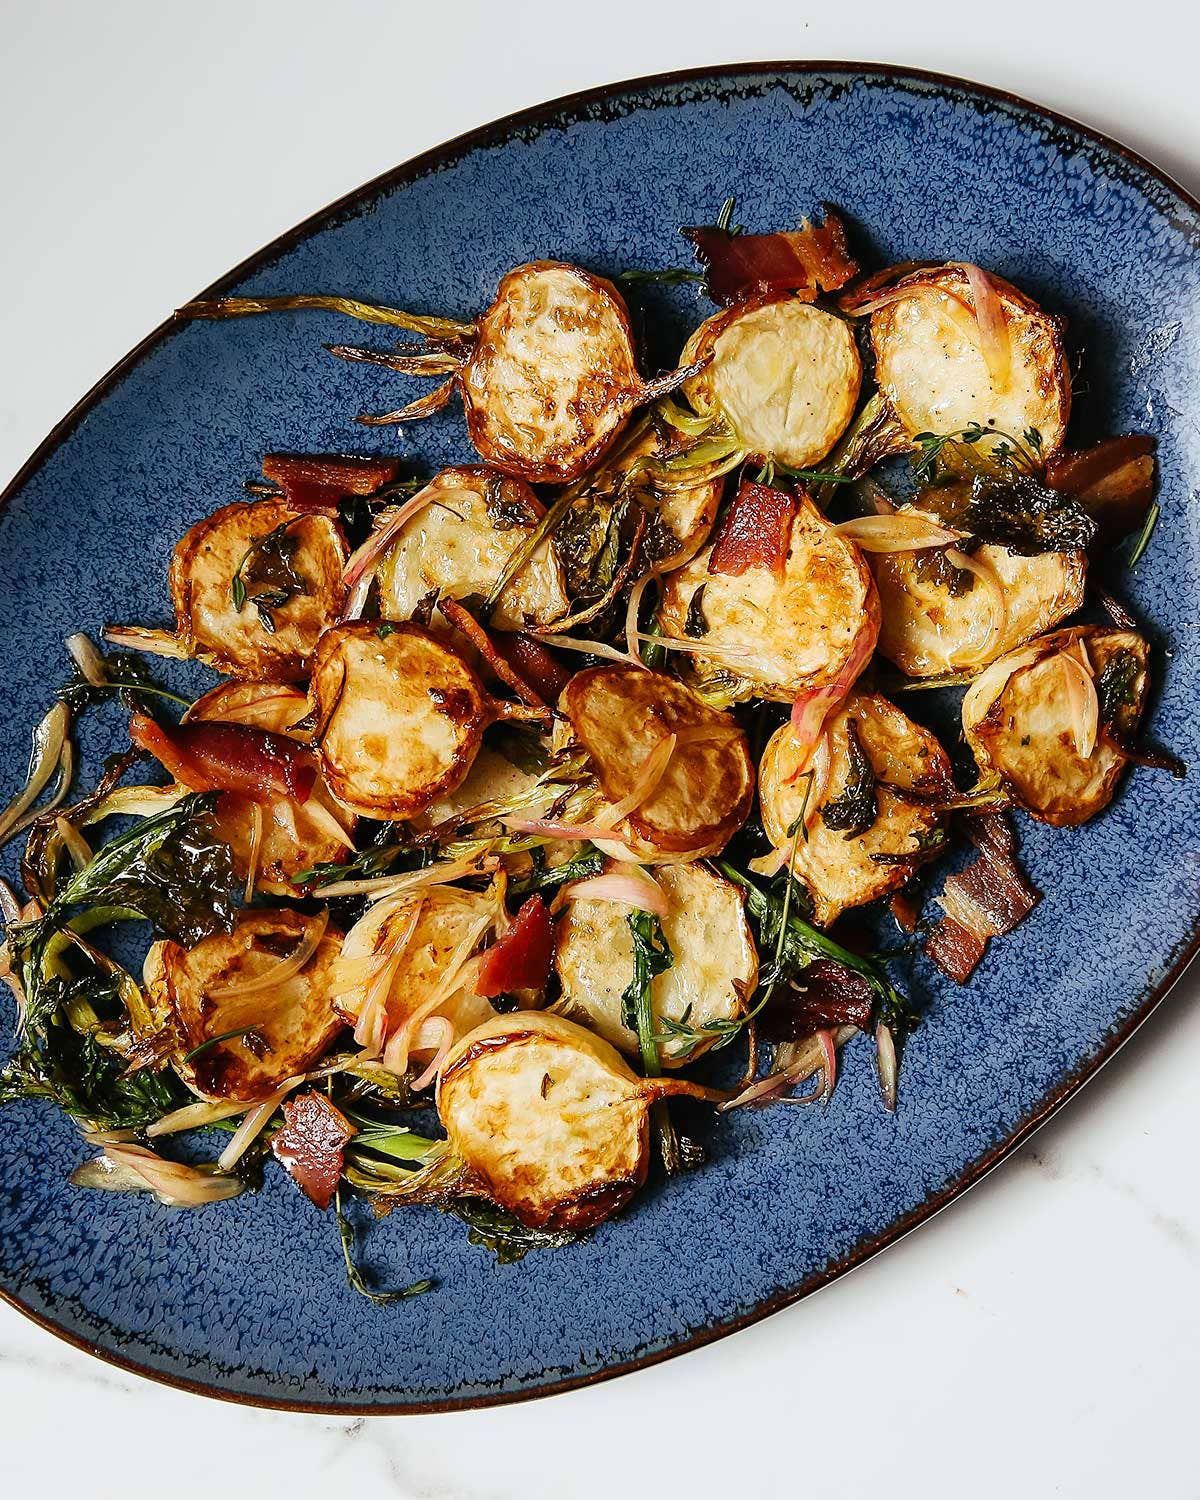 Roasted Turnips and Greens with Bacon Vinaigrette